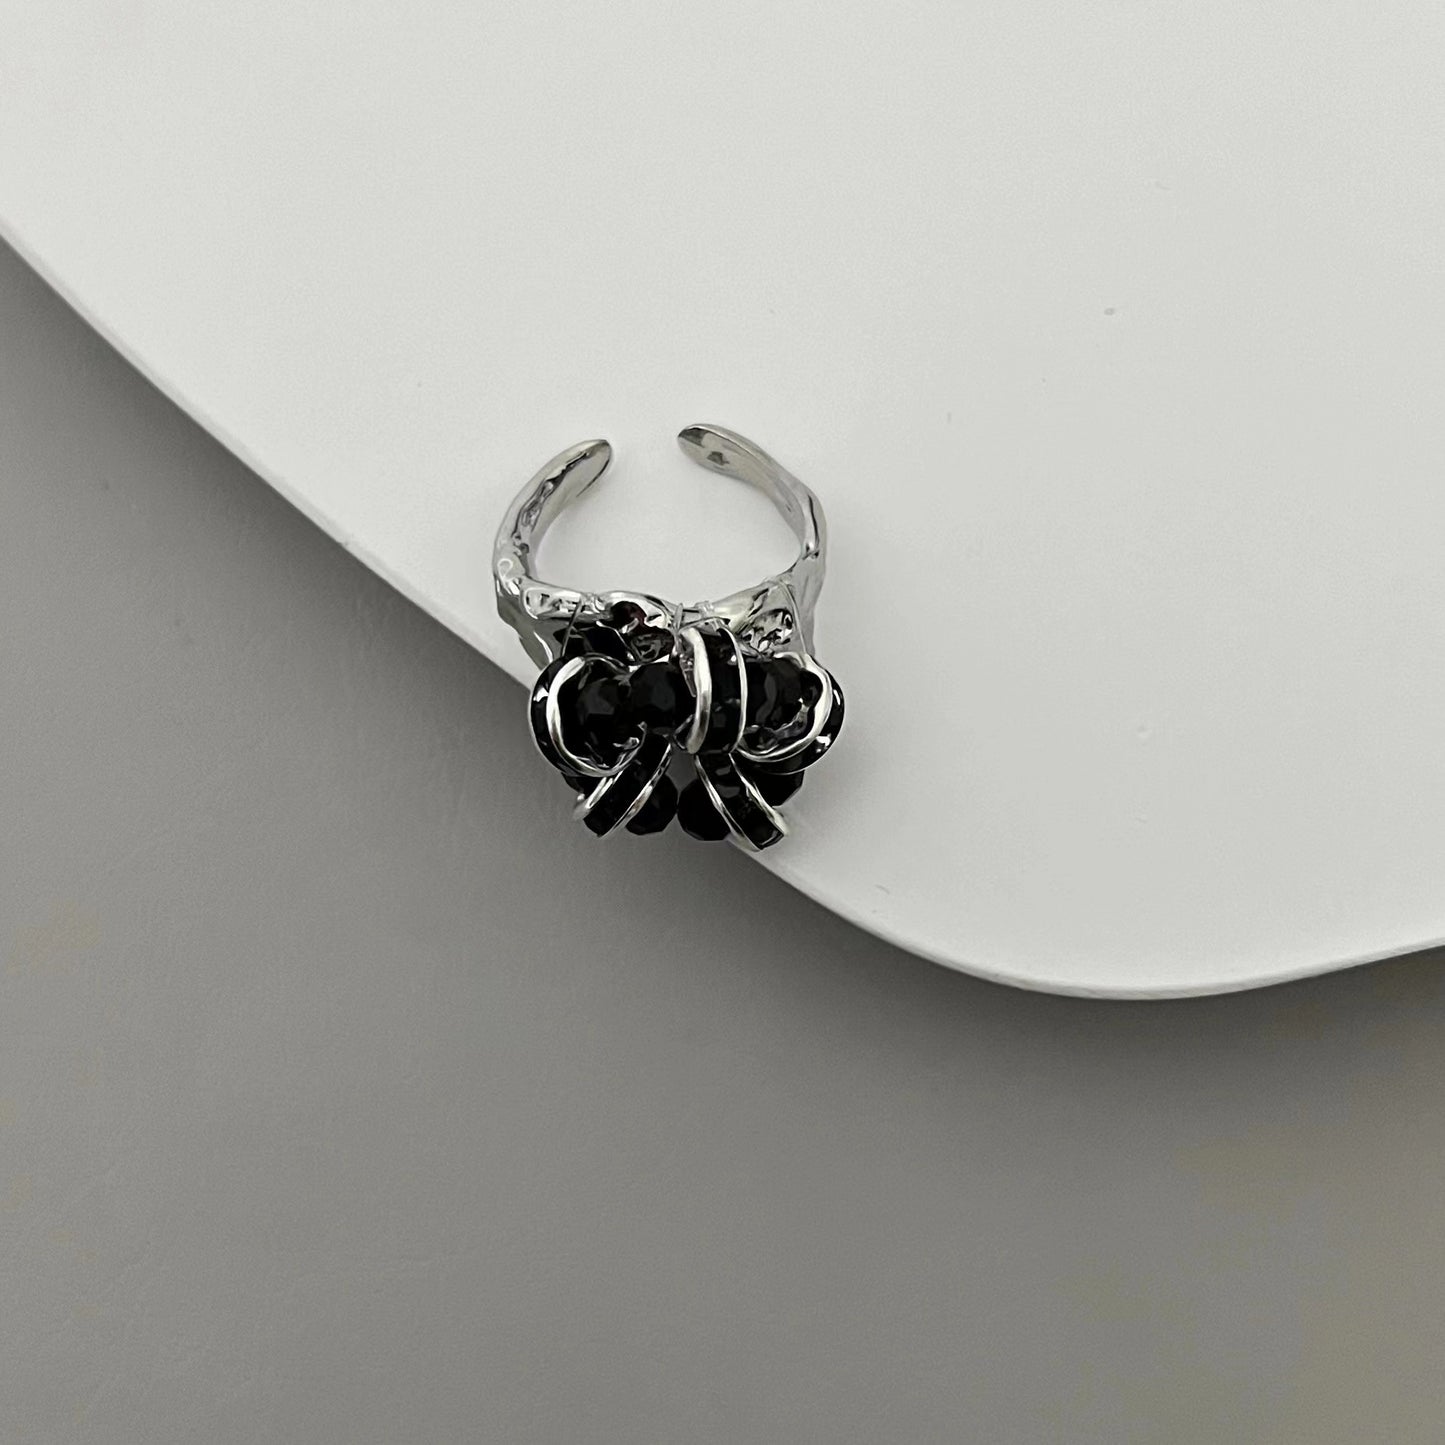 Original Black Poison Black Stone Ring with Small Design, Sweet and Cool Style, Simple and Advanced Sense, Personalized Ring for Male and Female Lovers